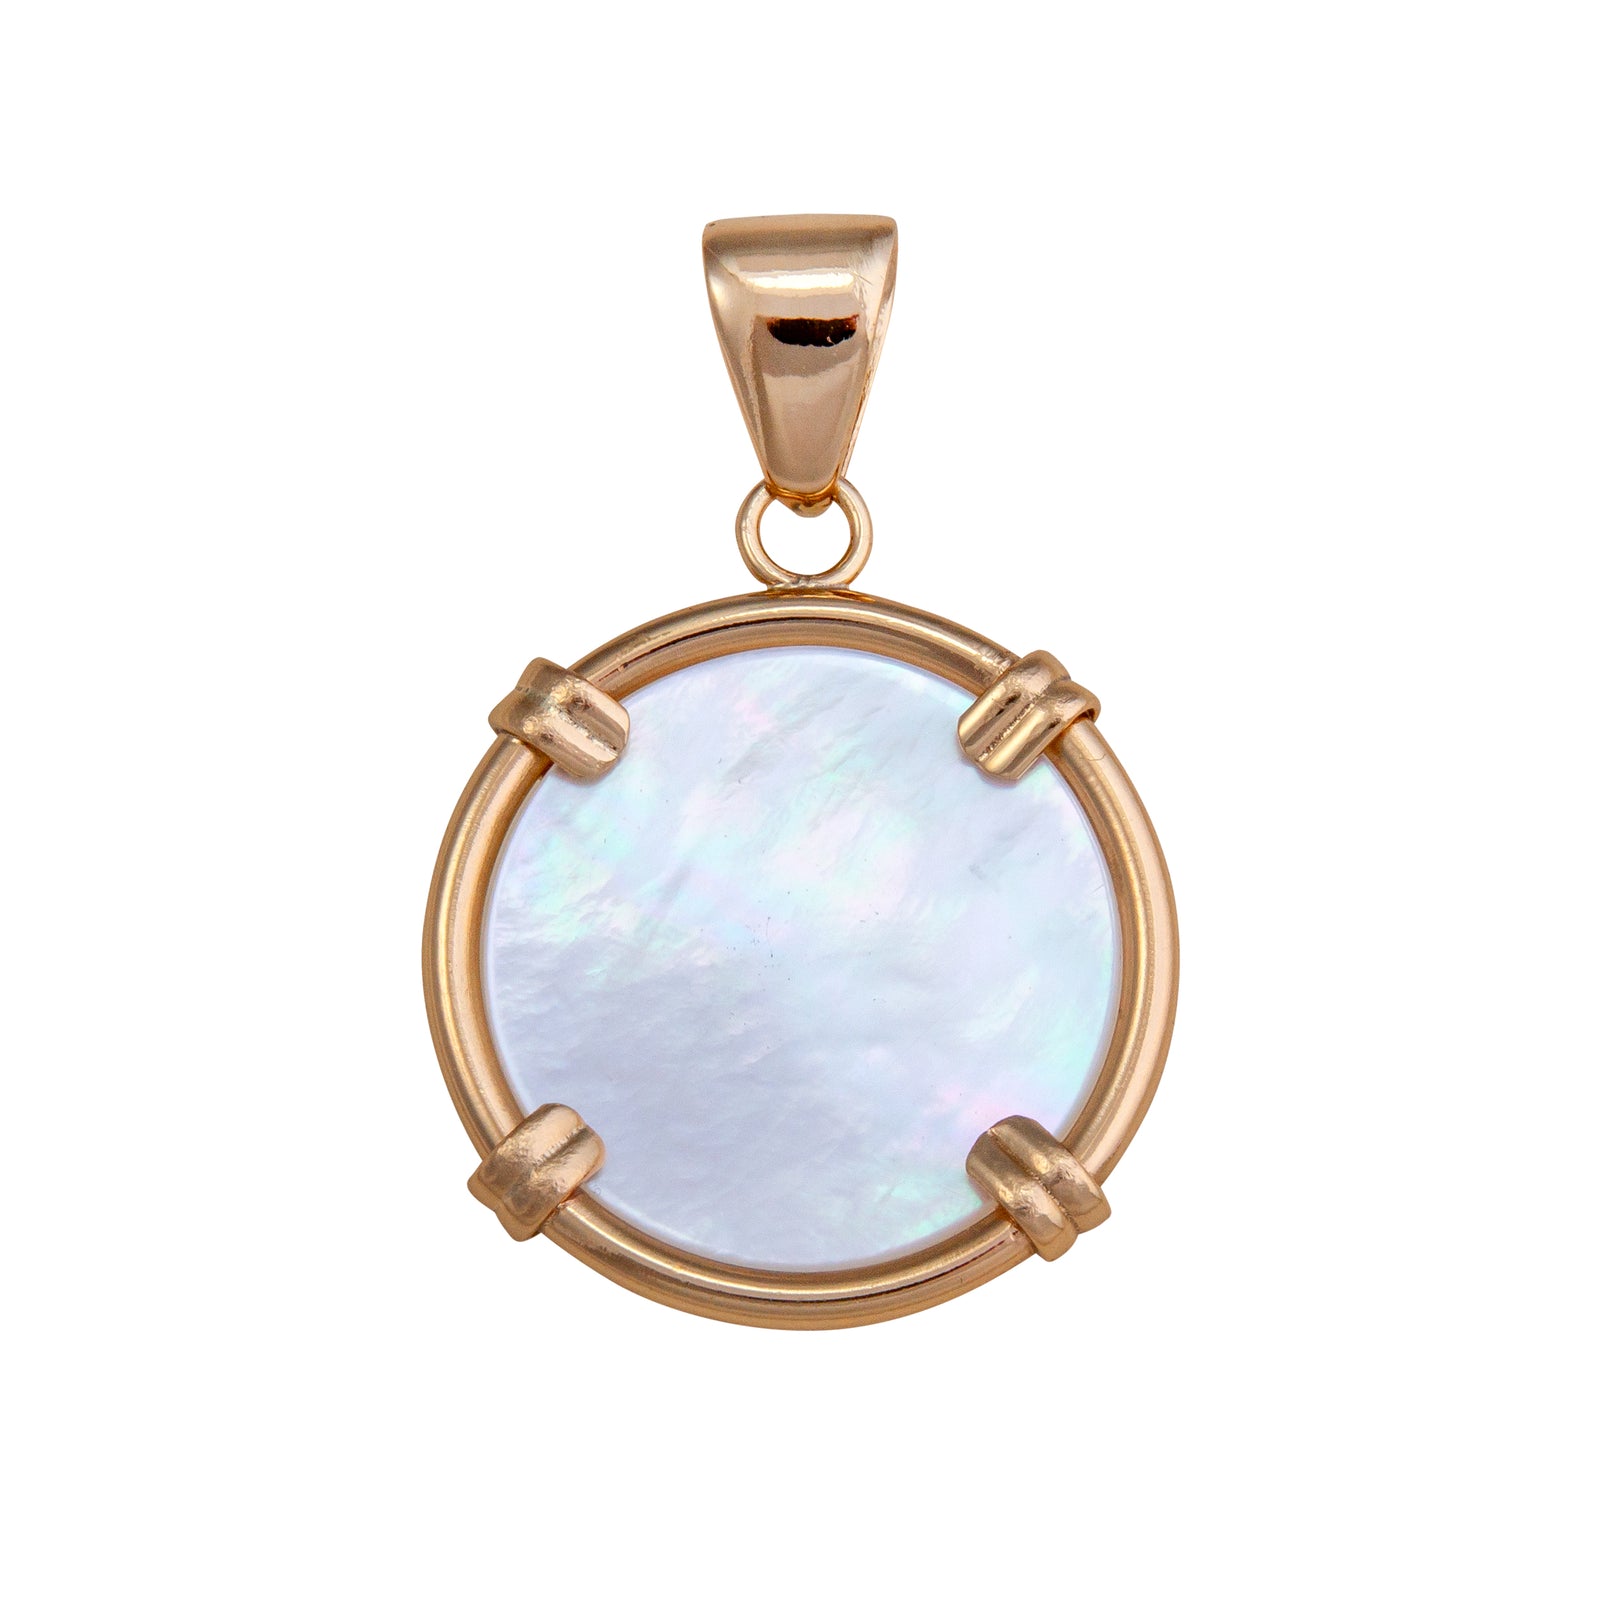 Alchemia Mother of Pearl Prong Pendant - Large | Charles Albert Jewelry